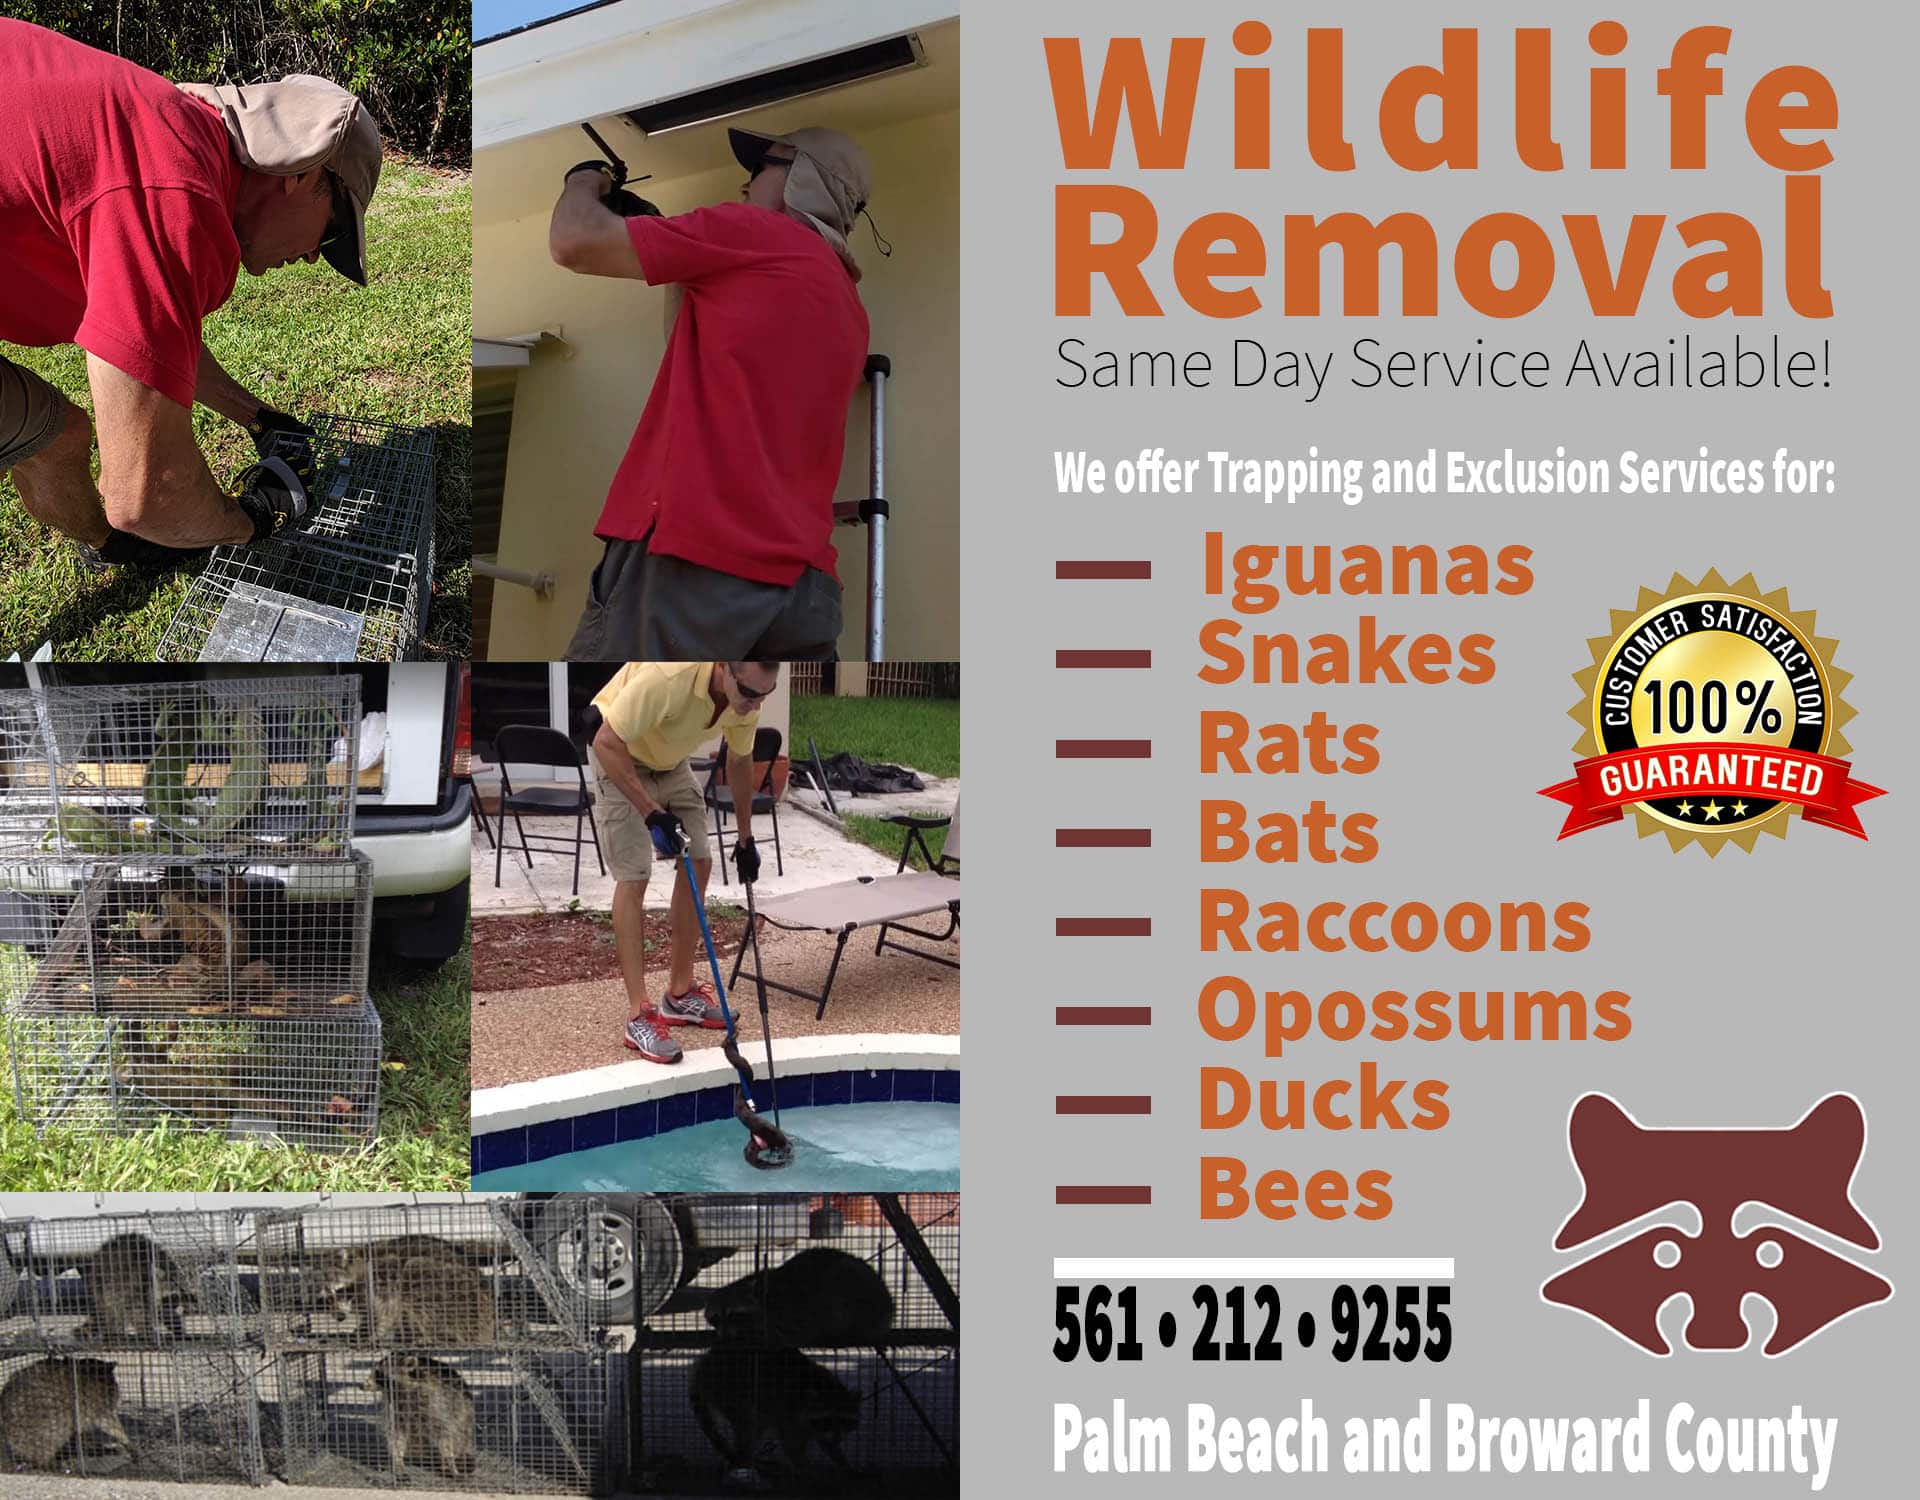 Contact the Best Wildlife Removal, Animal Control and Pest ...